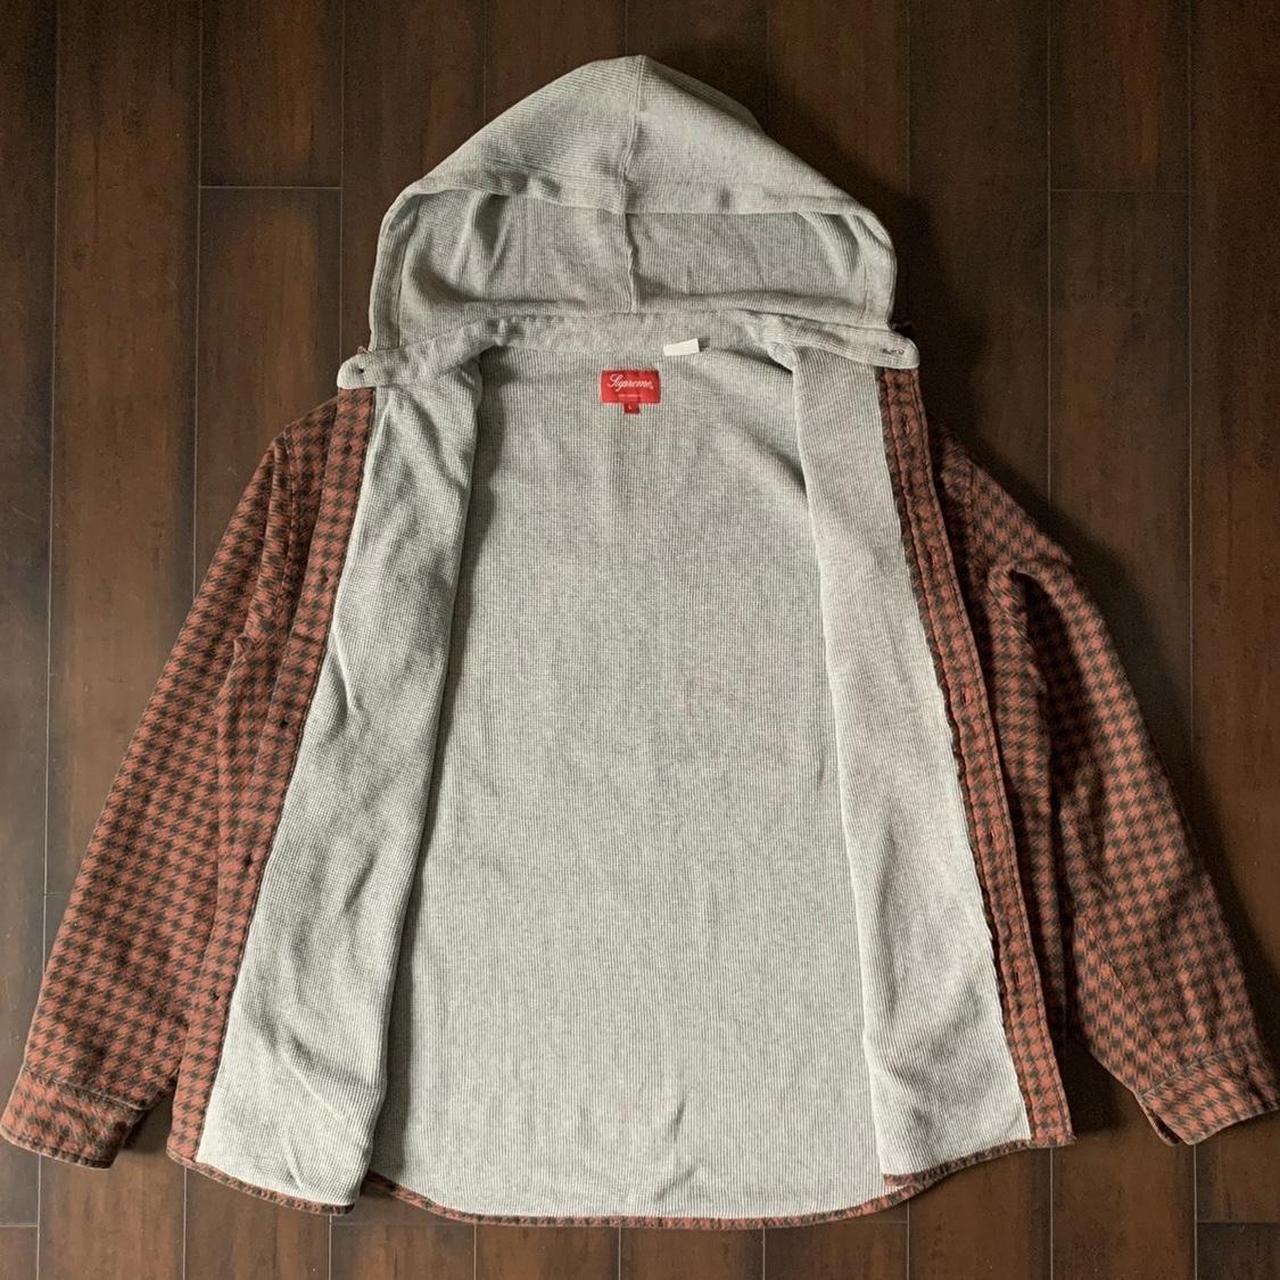 Supreme FW22 Houndstooth Flannel Hooded Shirt in... - Depop